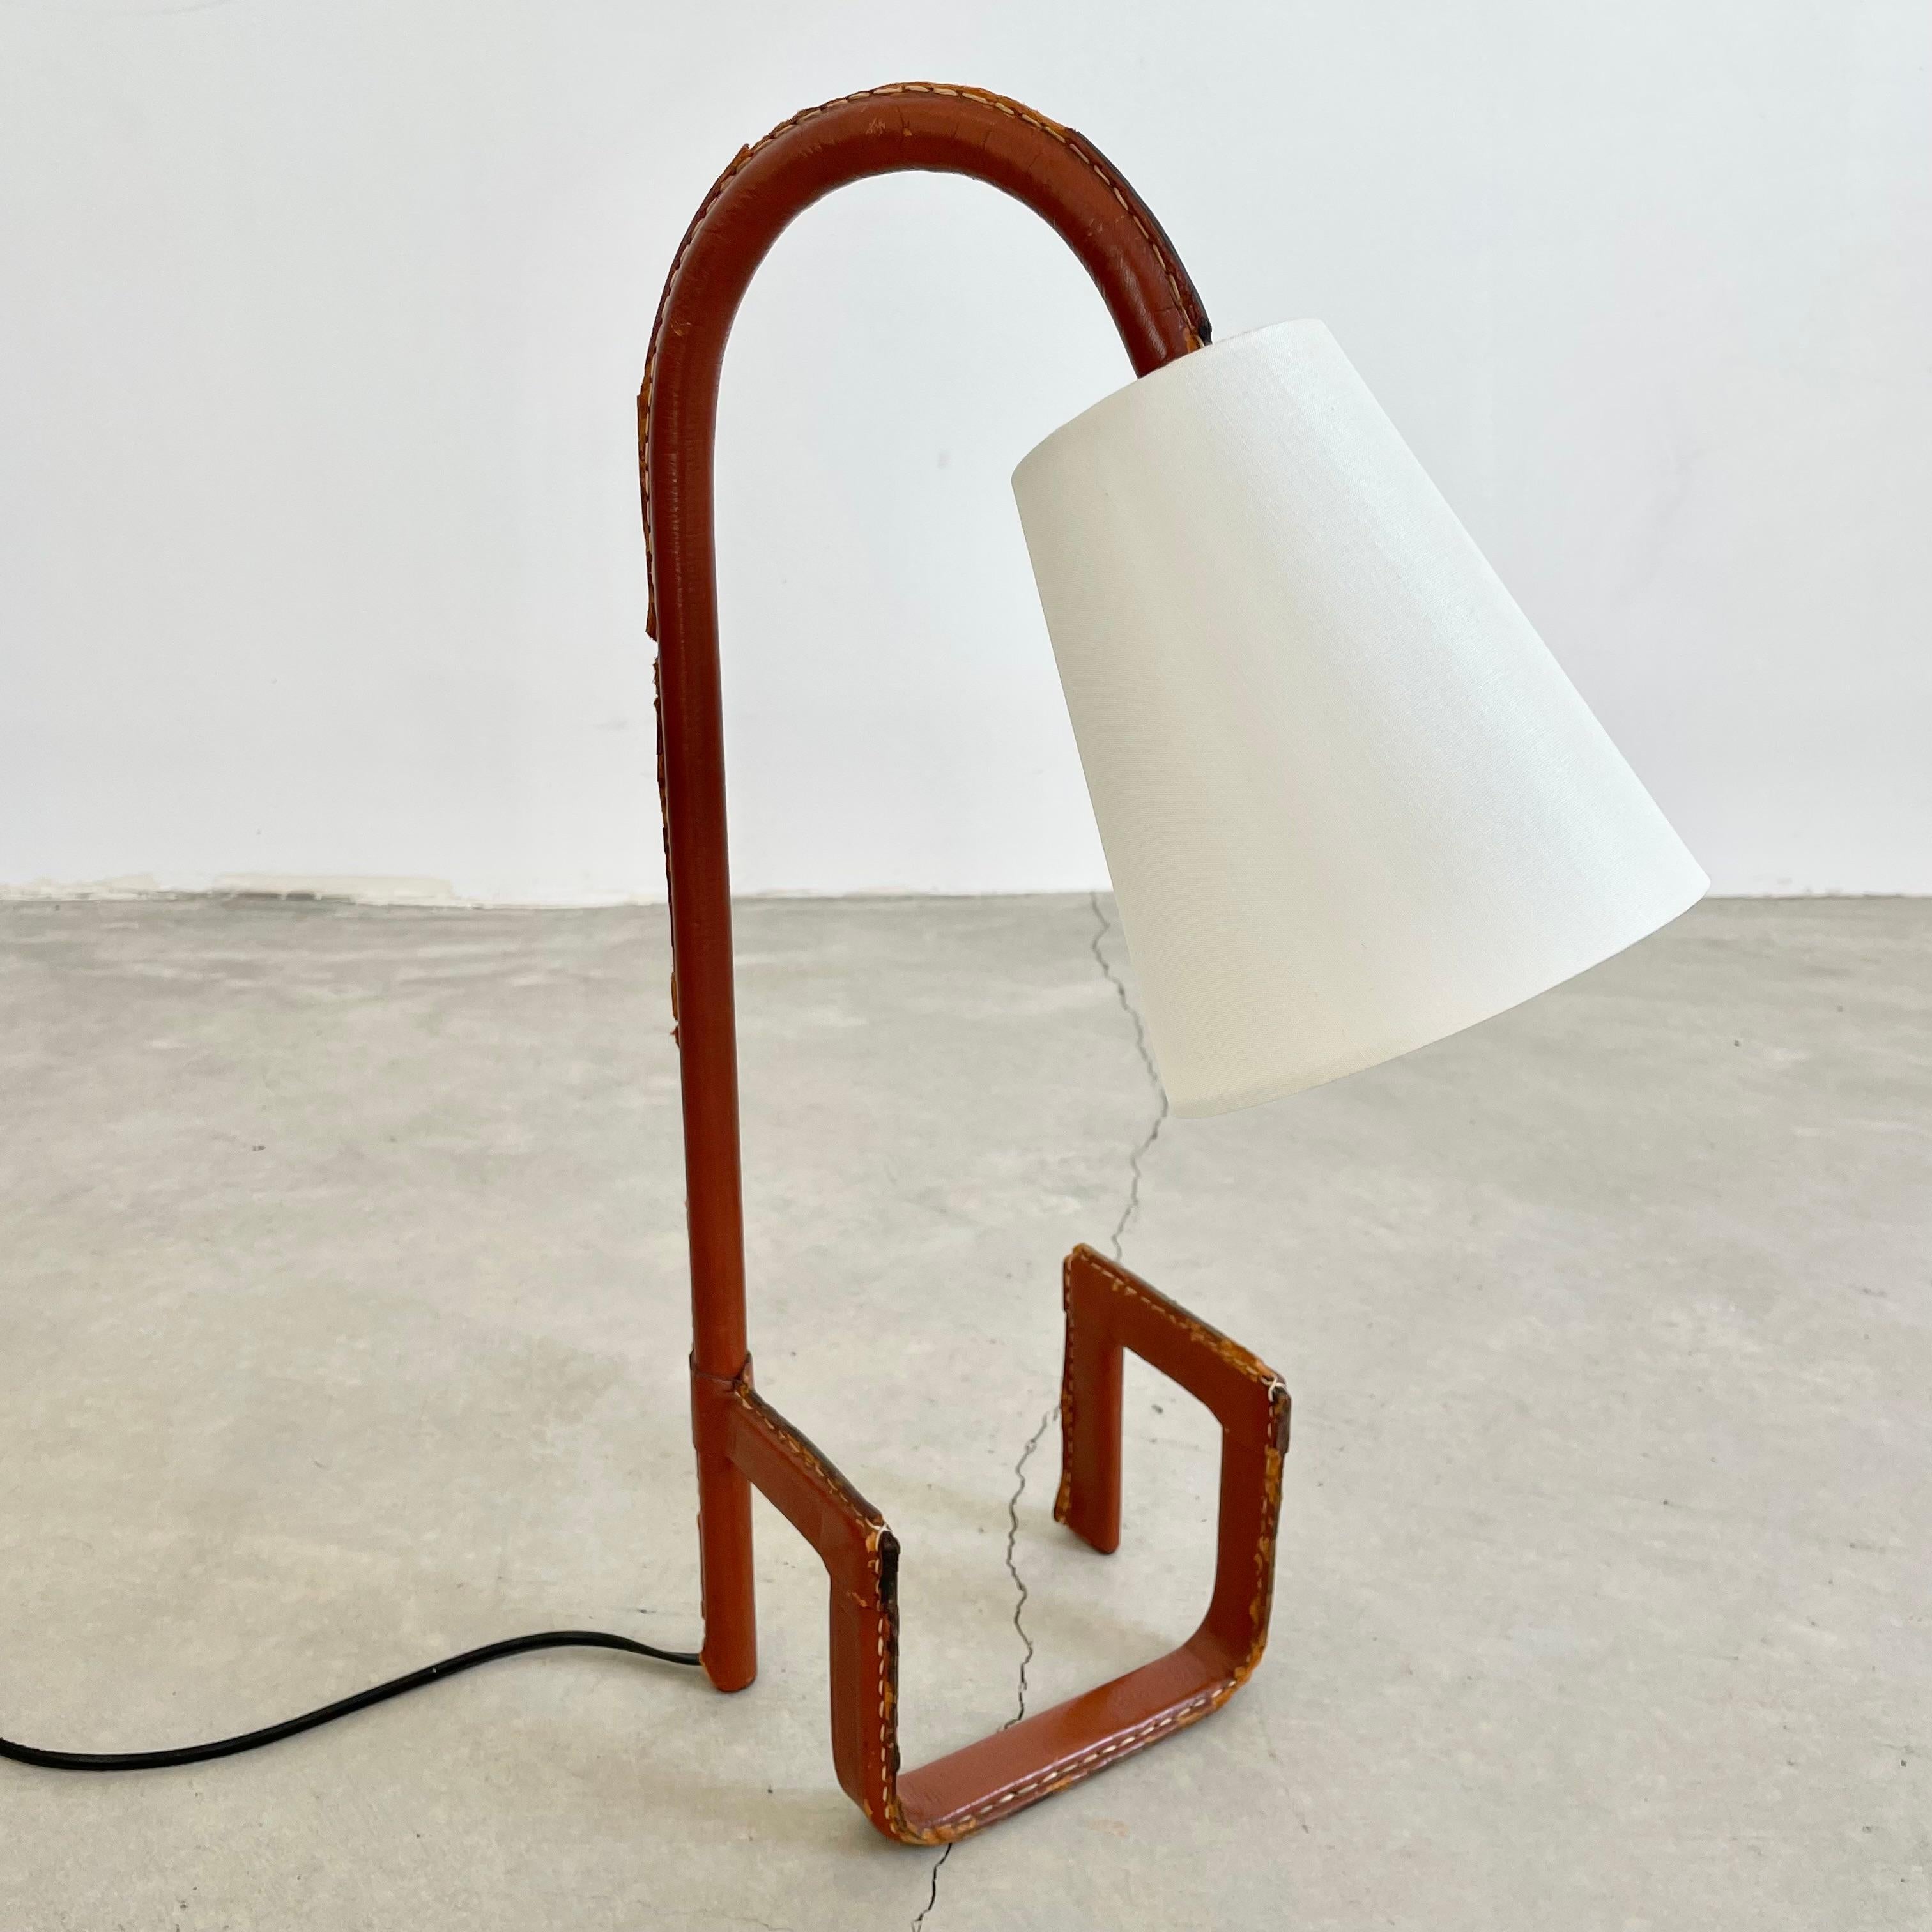 Jacques Adnet Leather Table Lamp with Built-In Bookshelf, 1950s France For Sale 6